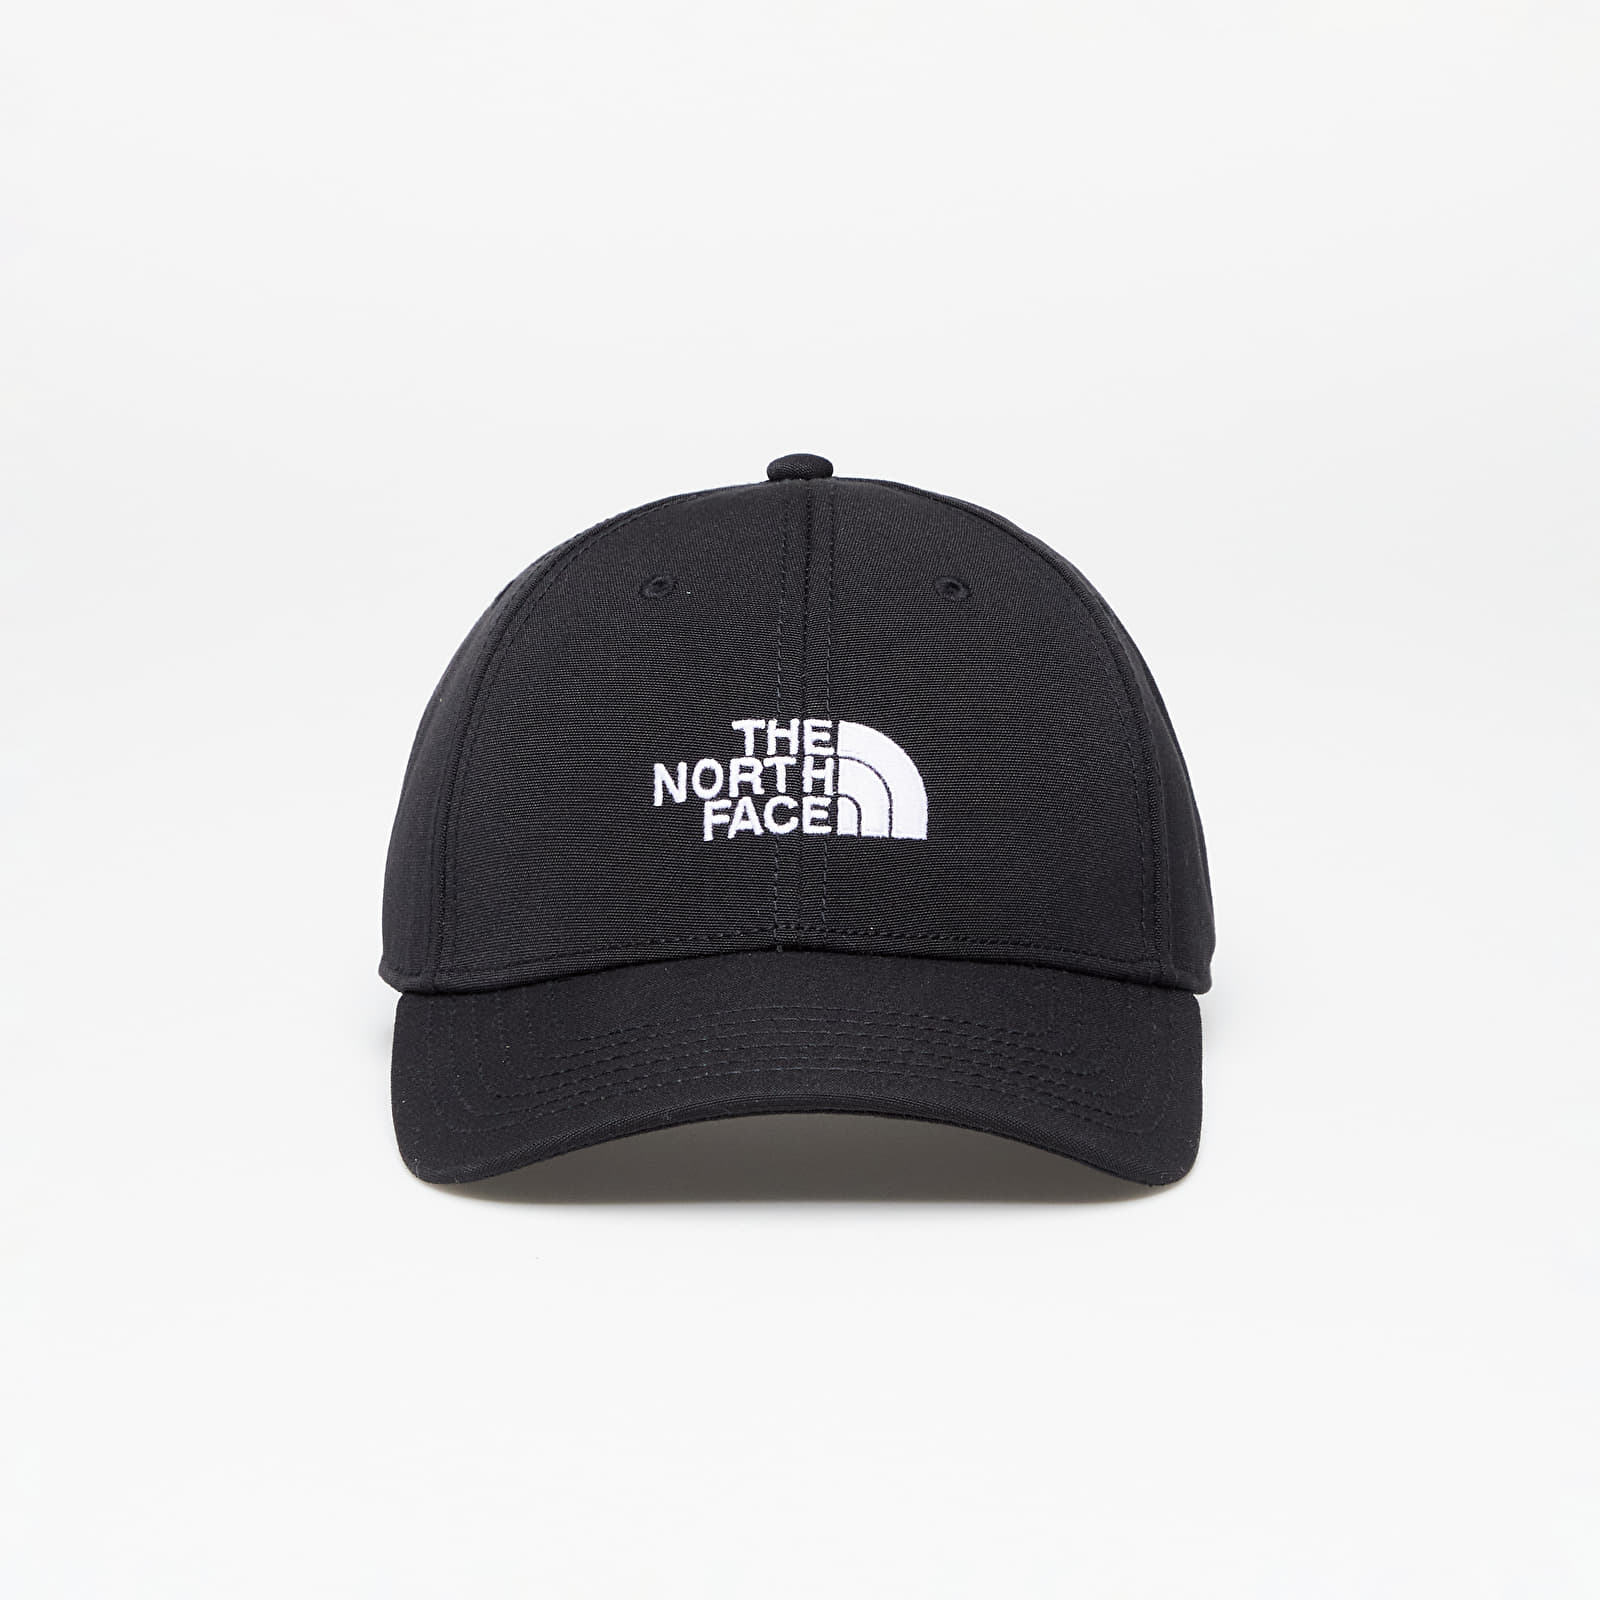 Caps The North Face Recycled 66 Classic Hat Tnf Black/Tnf White